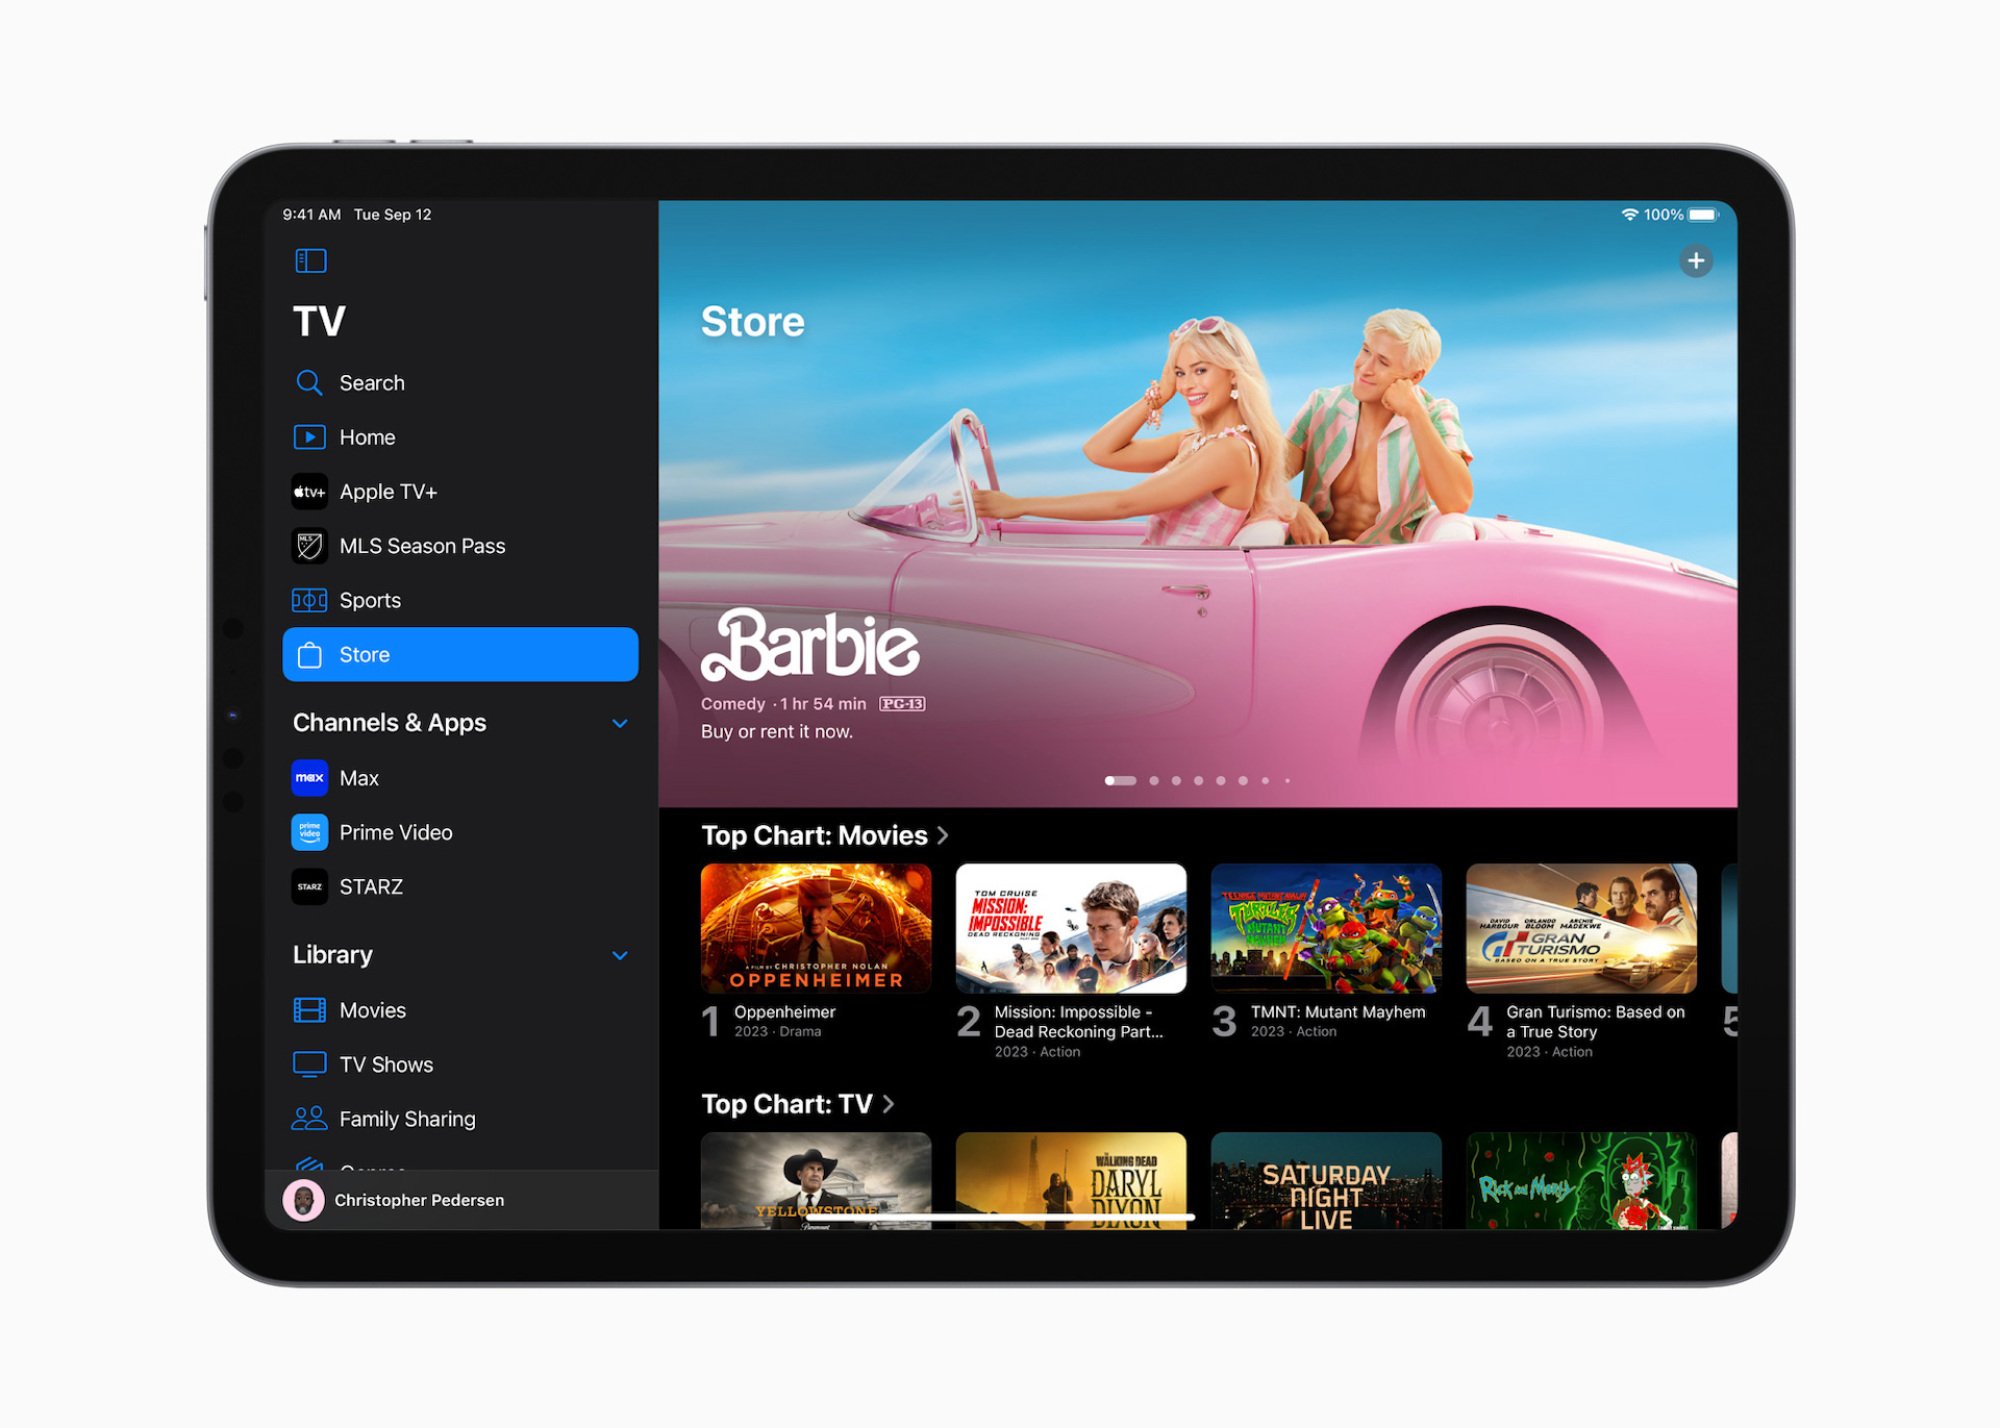 The updated Apple TV app showing Barbie for sale and rent.